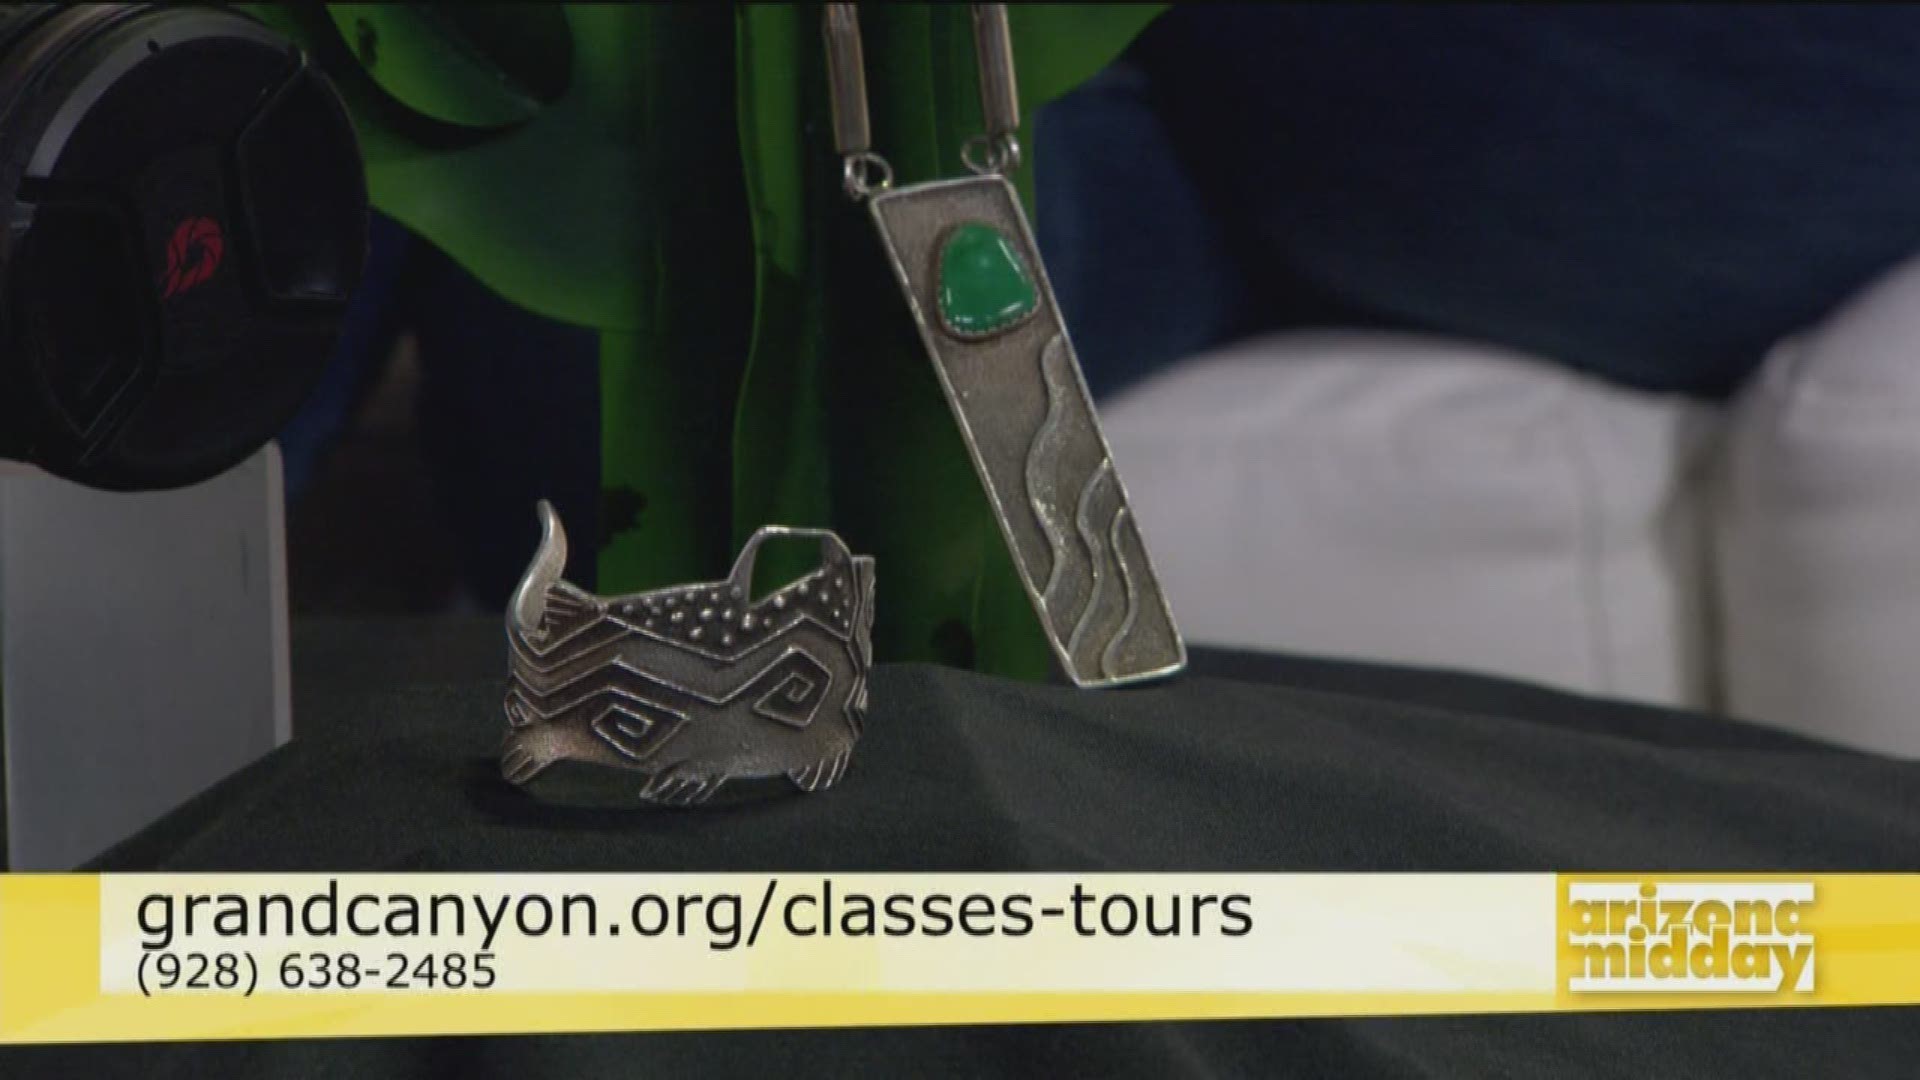 Mindy Riesenberg from Grand Canyon Conservancy shows us beautiful native jewelry, and how you could create your own at the rim with classes plus how to shop.